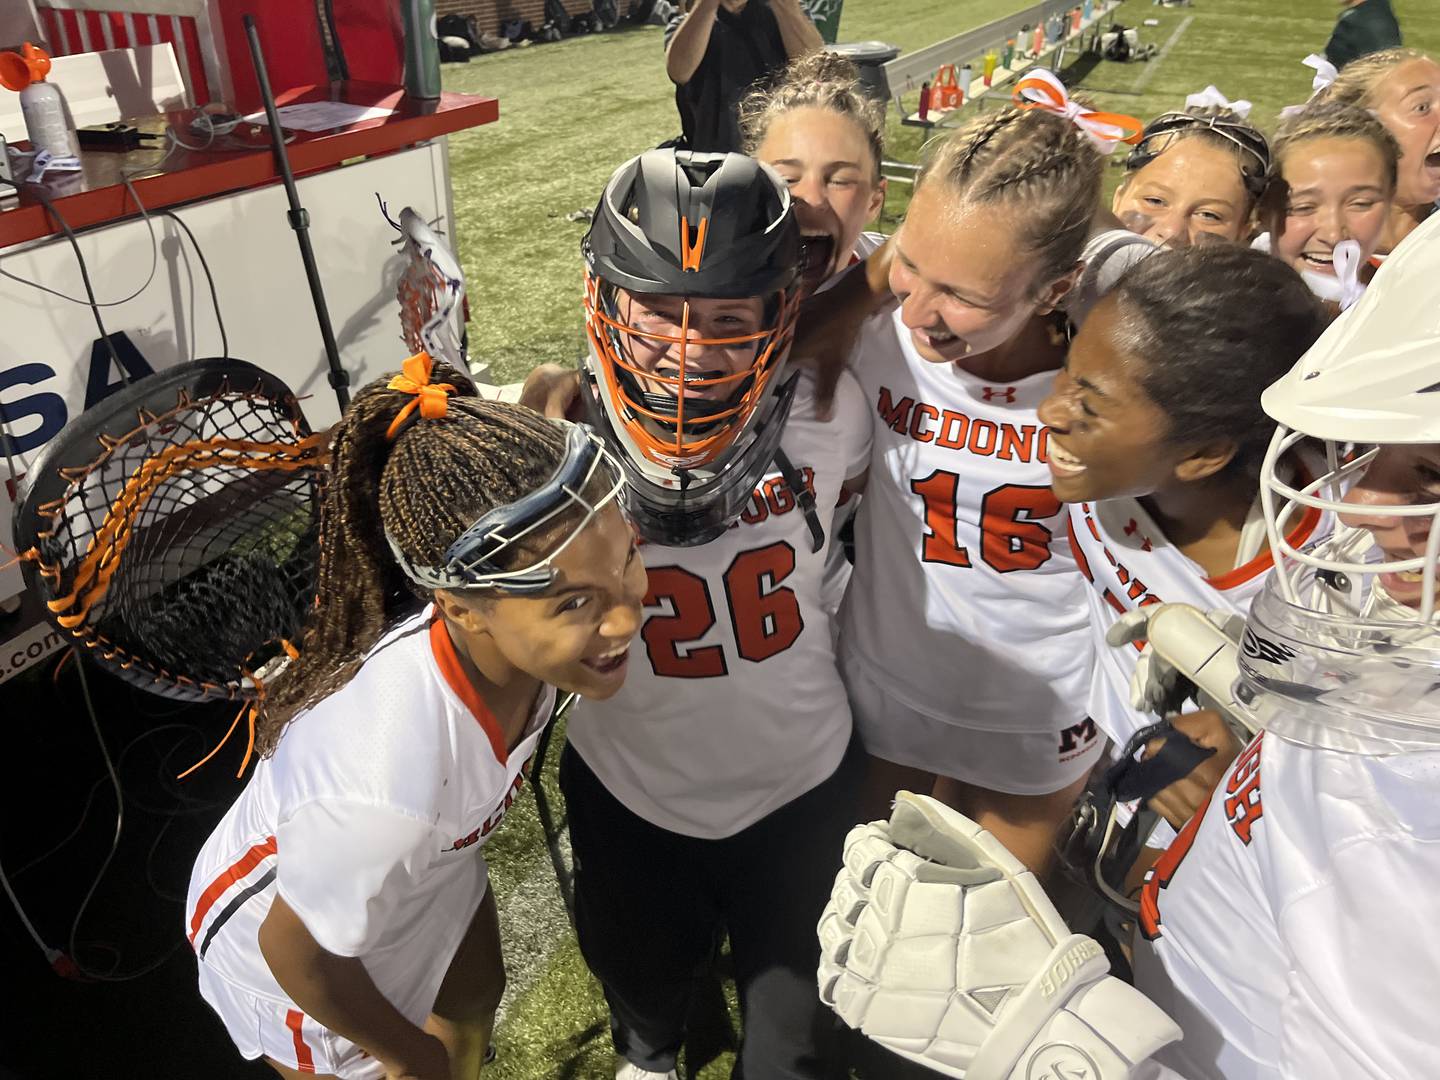 McDonogh goalie Reagan O'Donovan (26) is congratulated by her teammates following Friday's IAAM A Conference lacrosse championship game. The freshman came up big with 9 saves as the top-ranked Eagles defeated No. 2 St. Paul's at USA Lacrosse's Tierney Field.